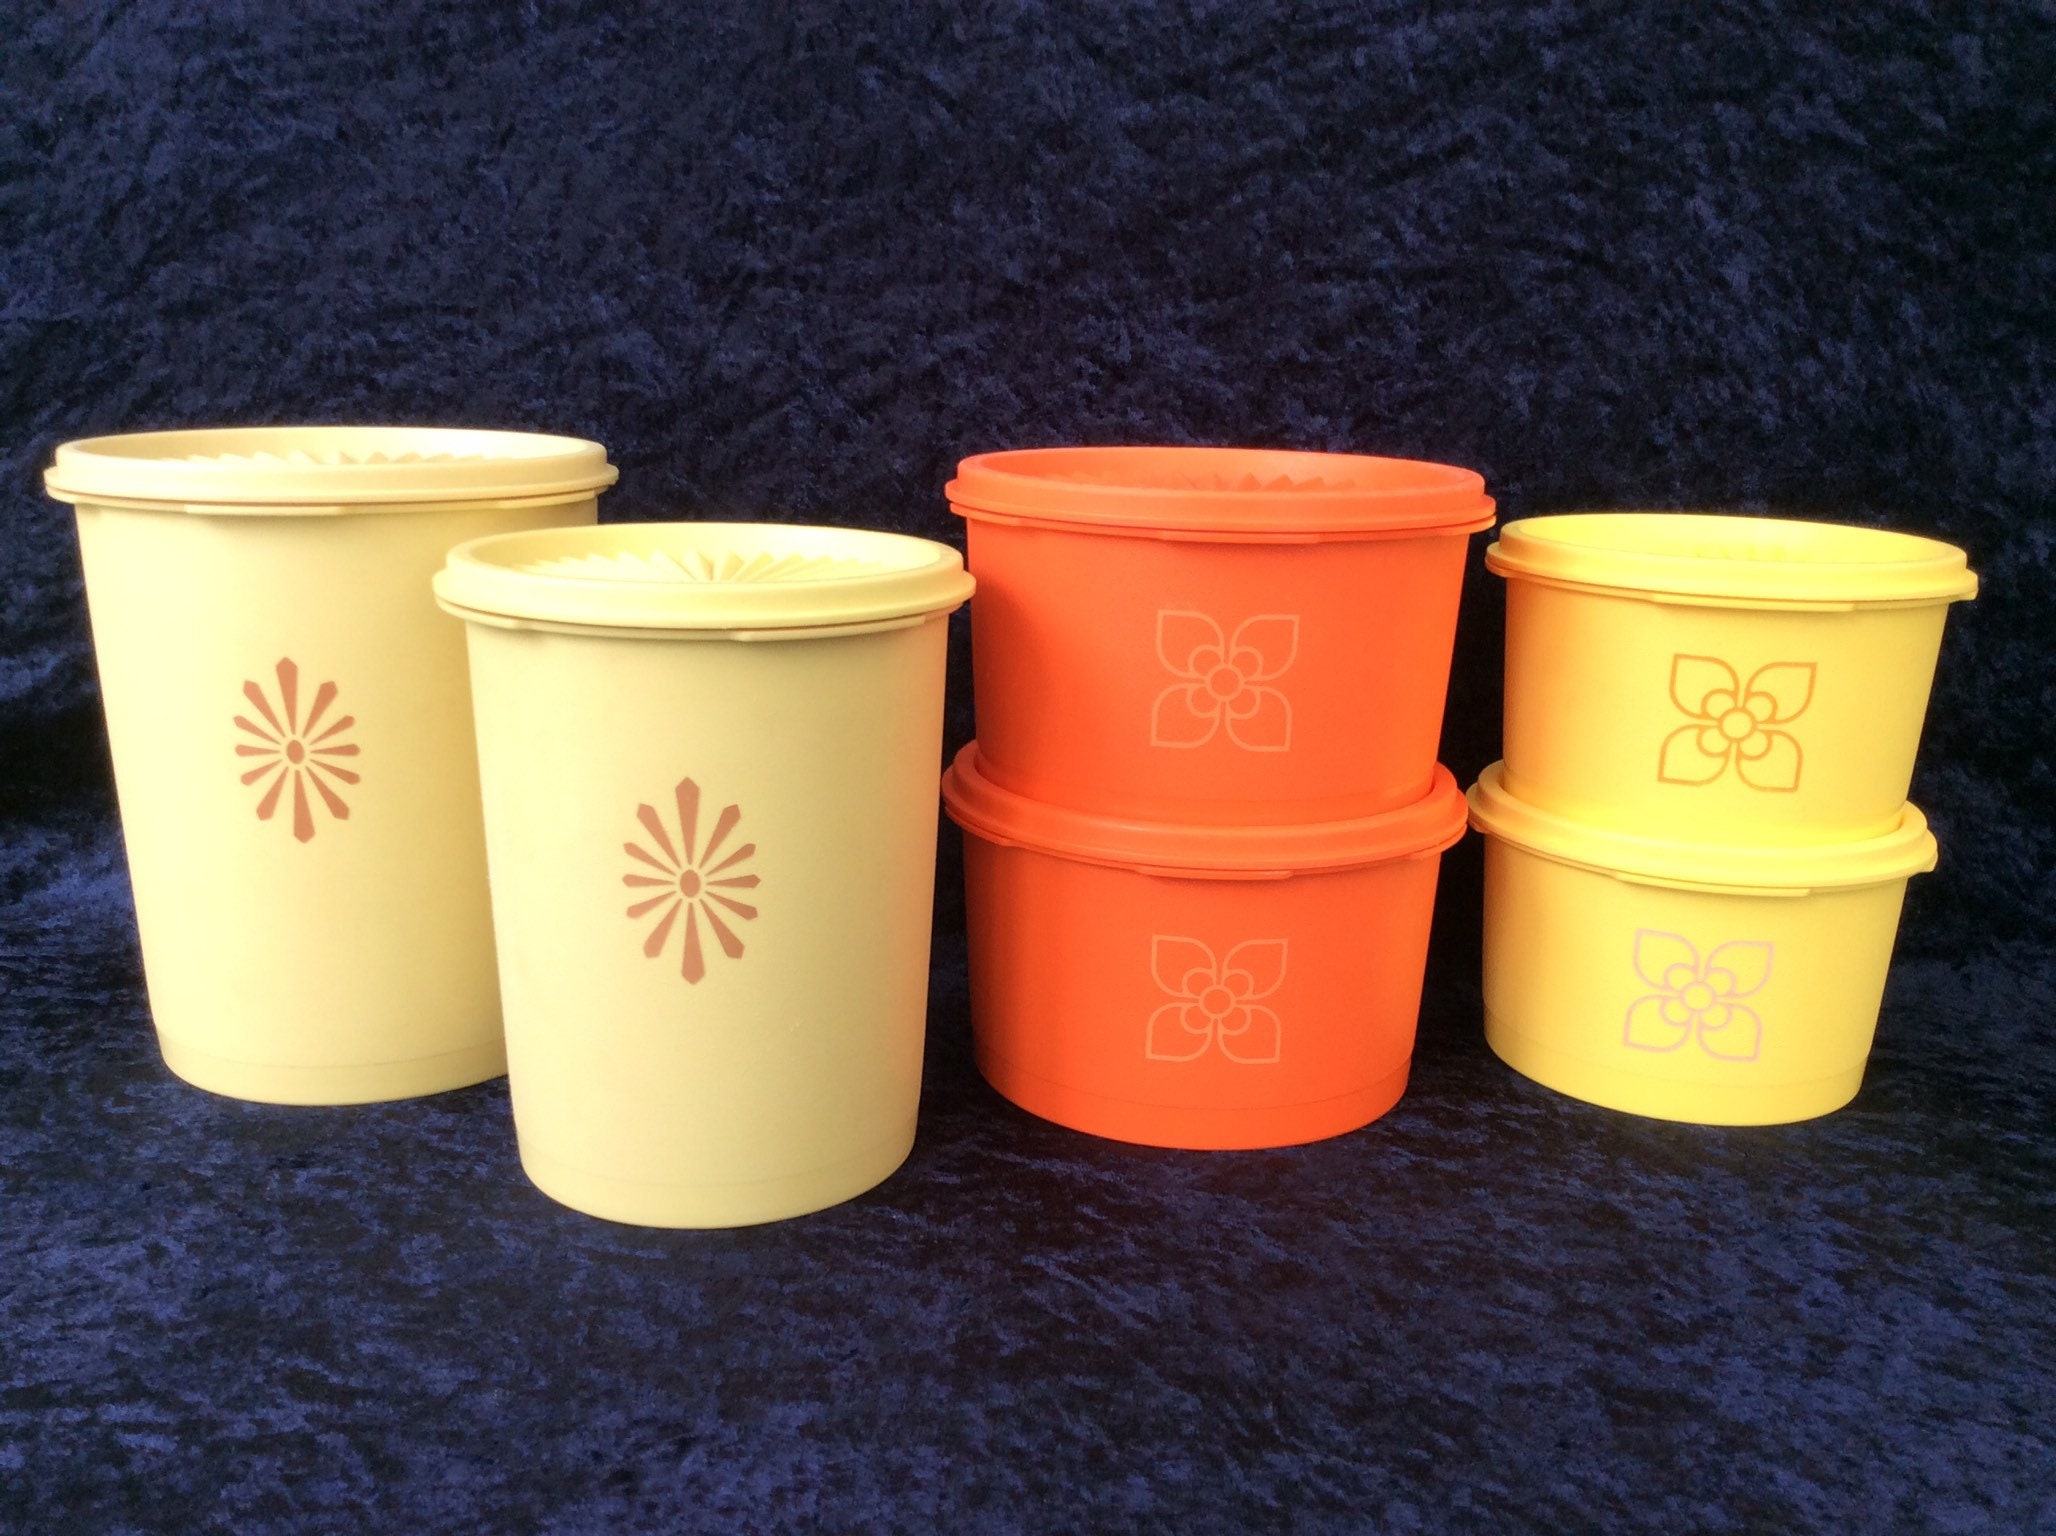 Vintage Tupperware Cracker Server - A Stylish Look Back in Yellow